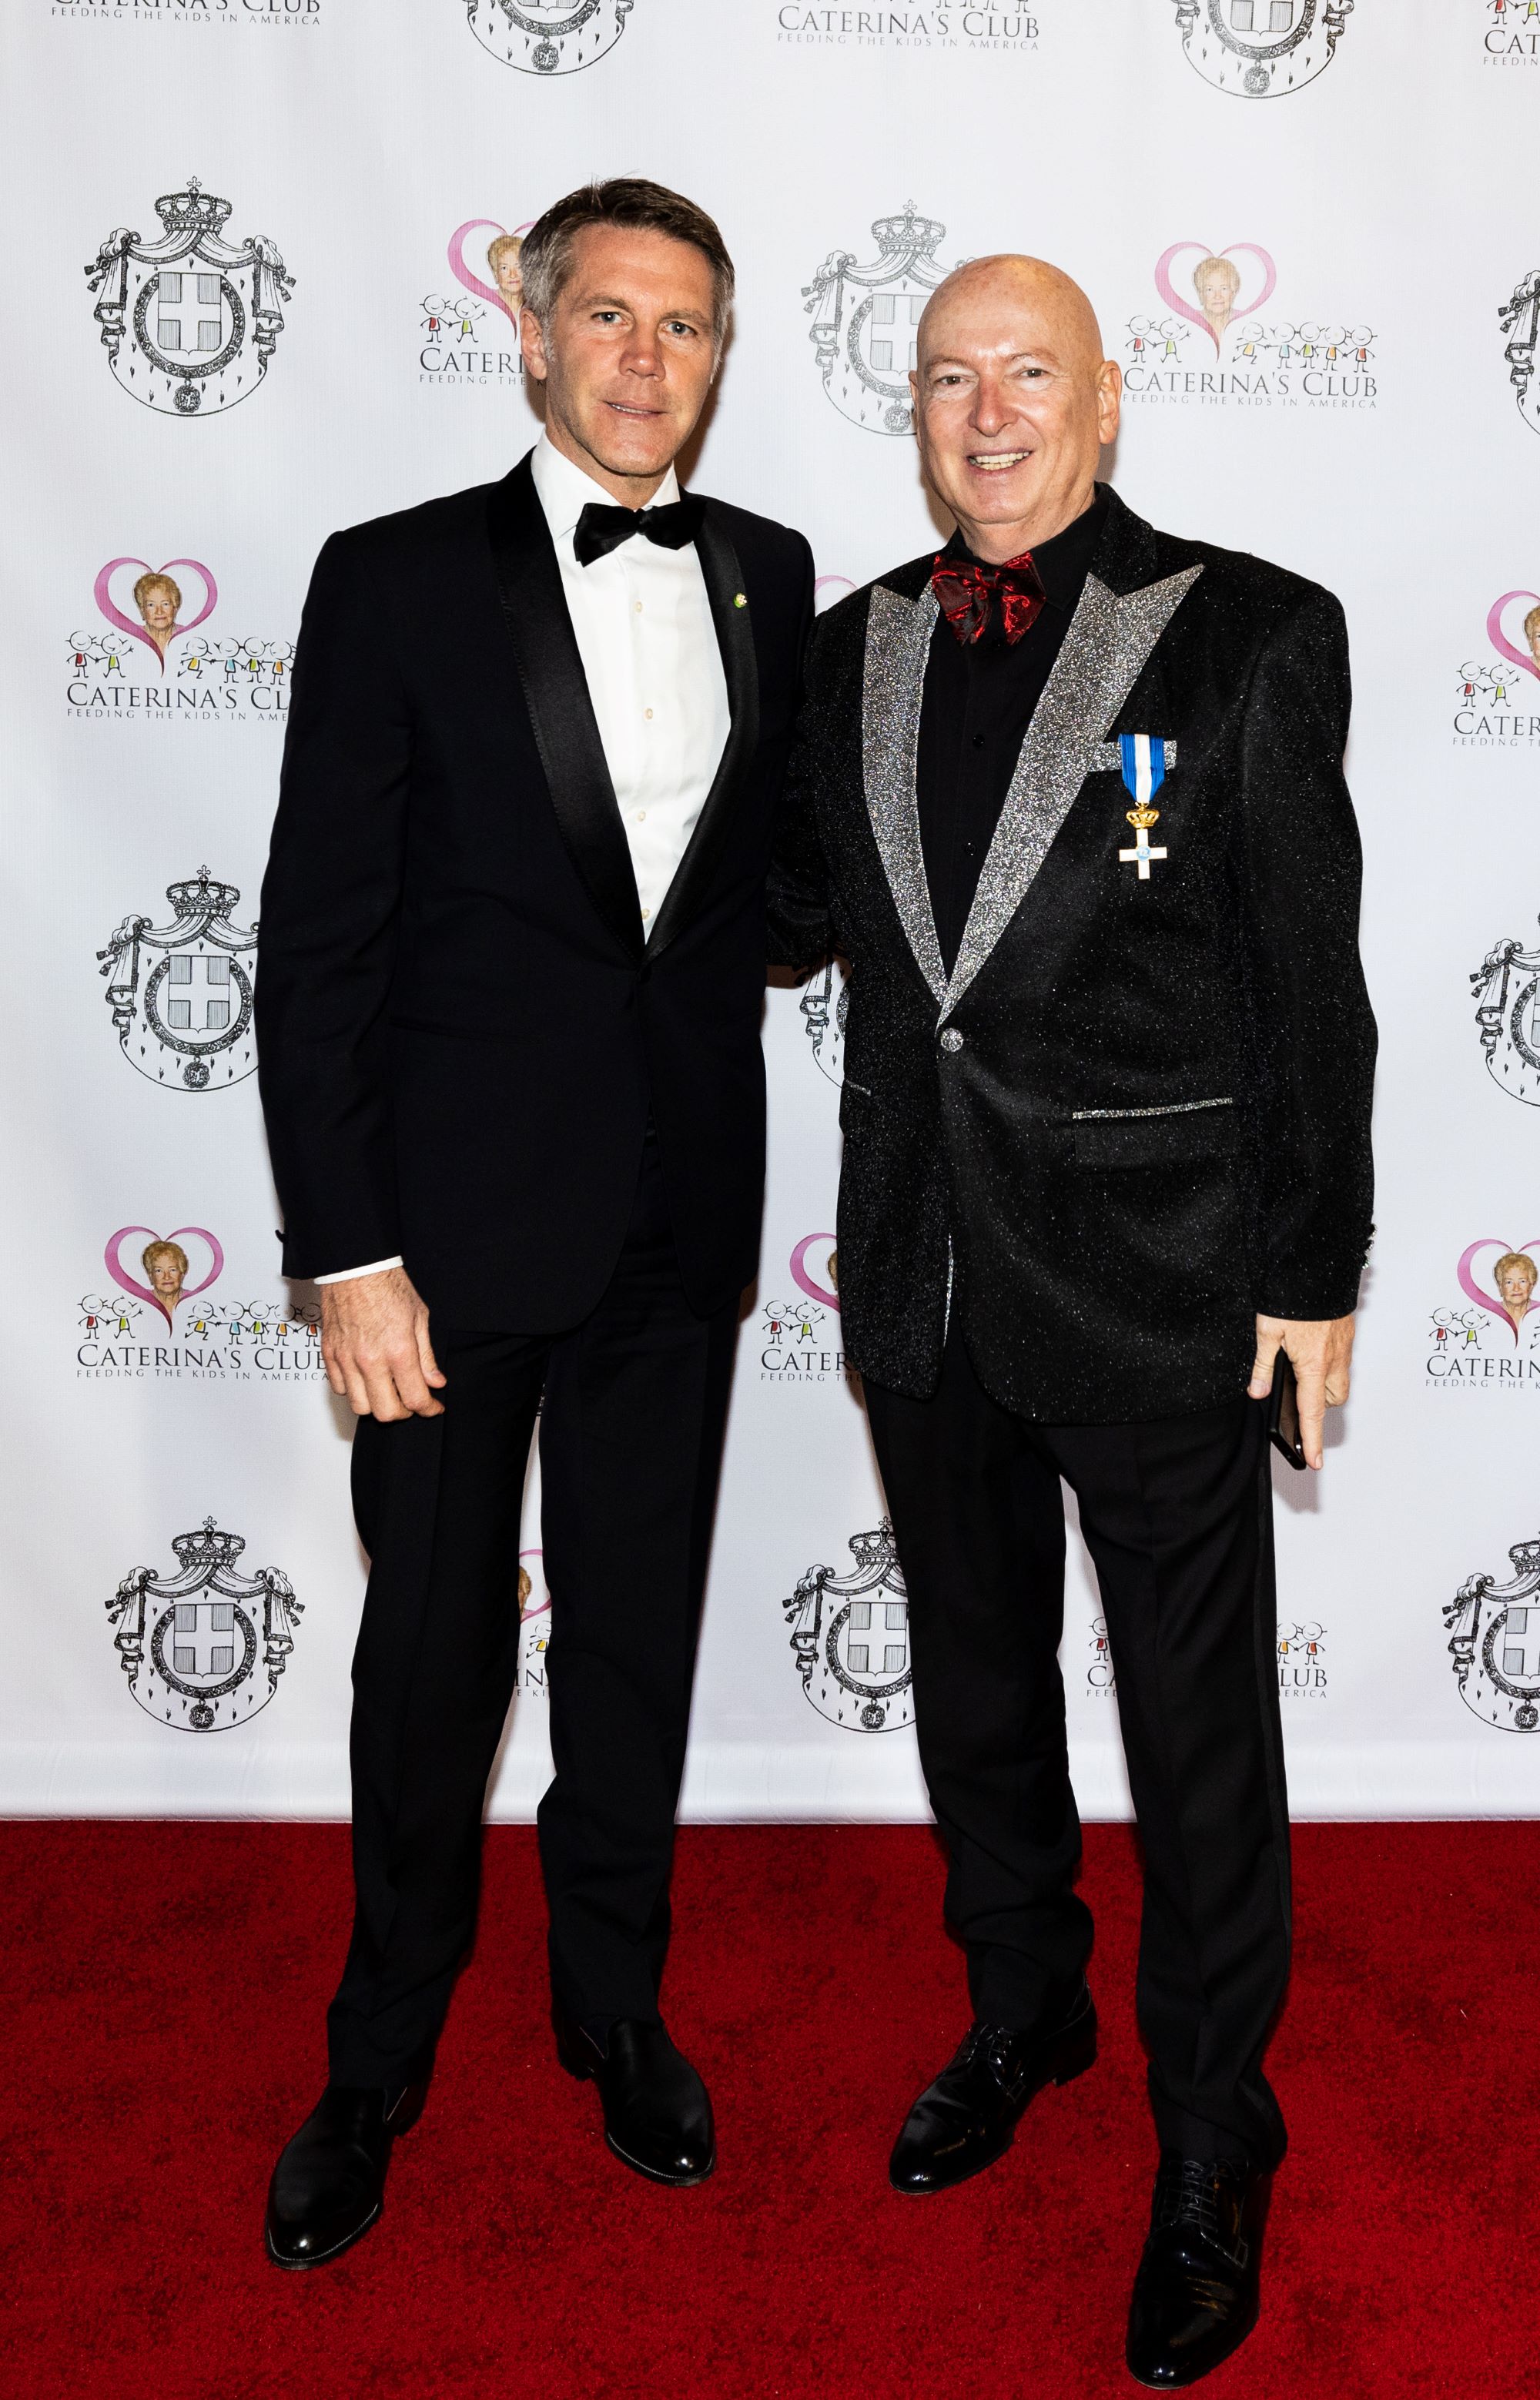 HRH Prince Emmanuel Philibert of Savoy with Savoy Orders Officer Bruno Serato at the 5th Annual Notte di Savoia Los Angeles Gala Dinner Benefiting Caterina's Club